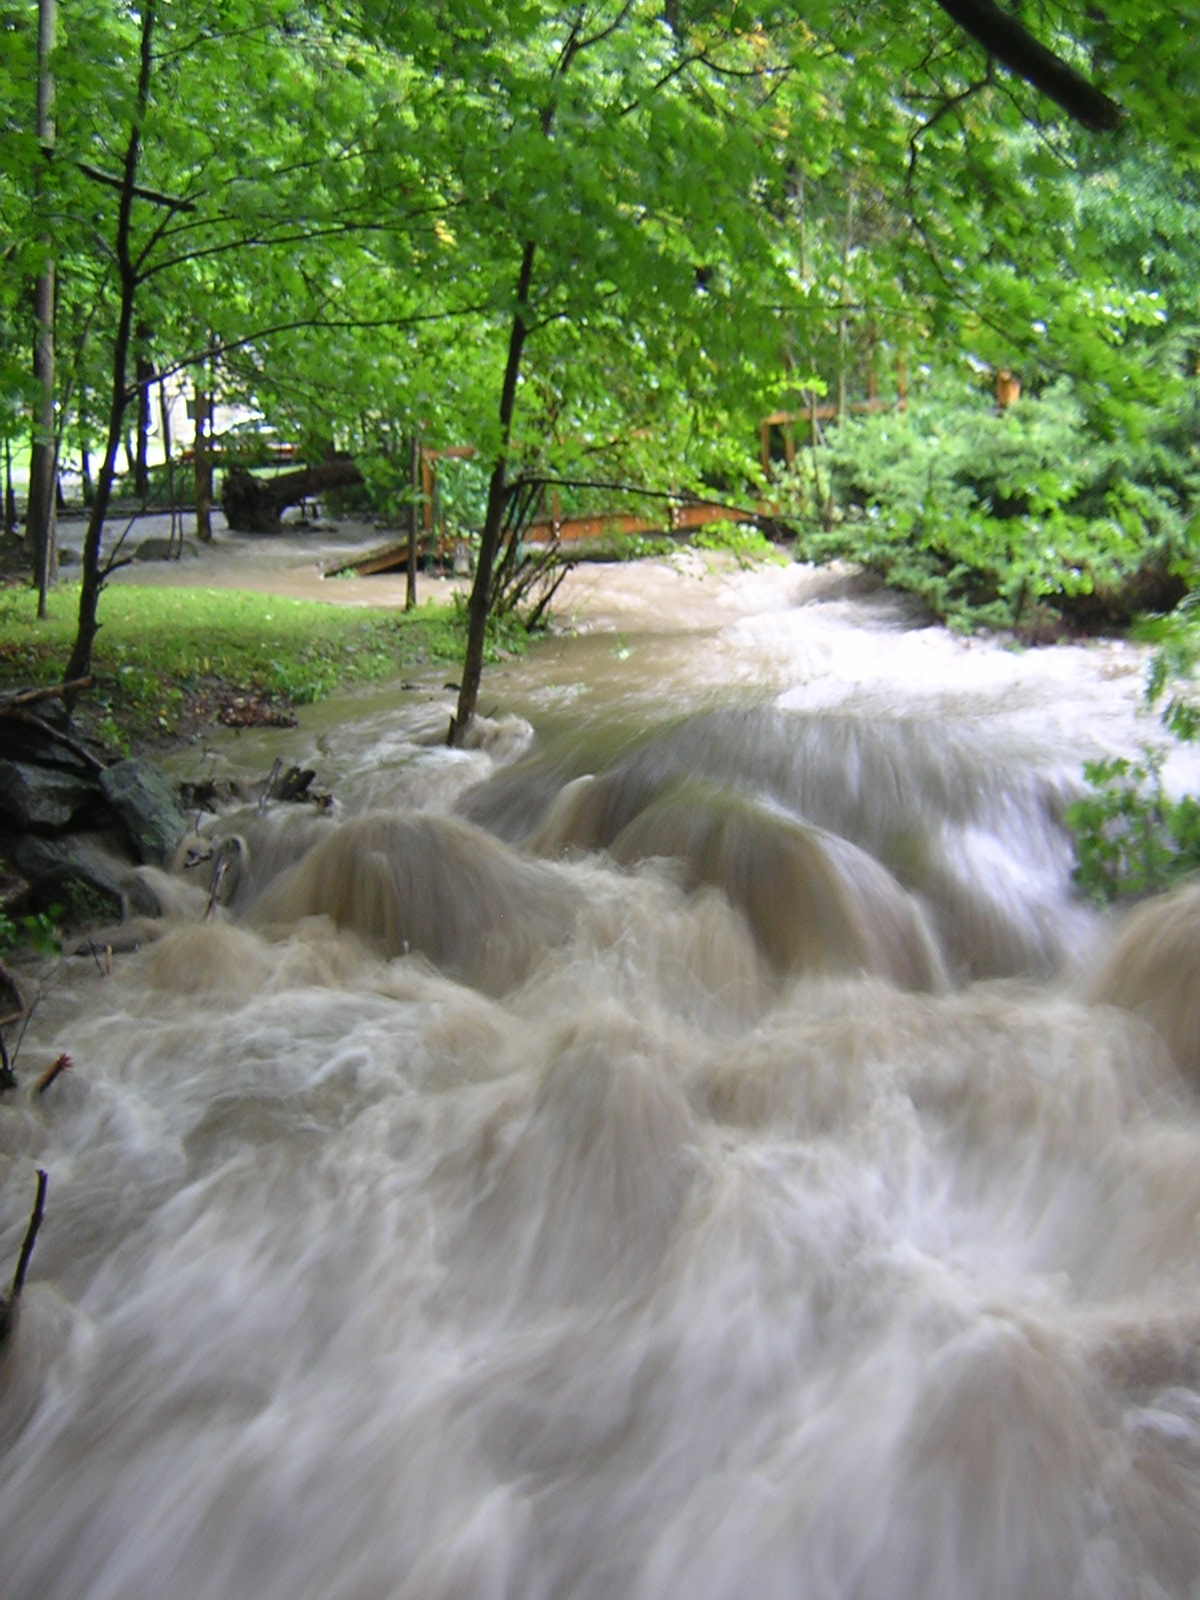 Flooding caused by Ivan, in particular the newly formed rapids in the brook